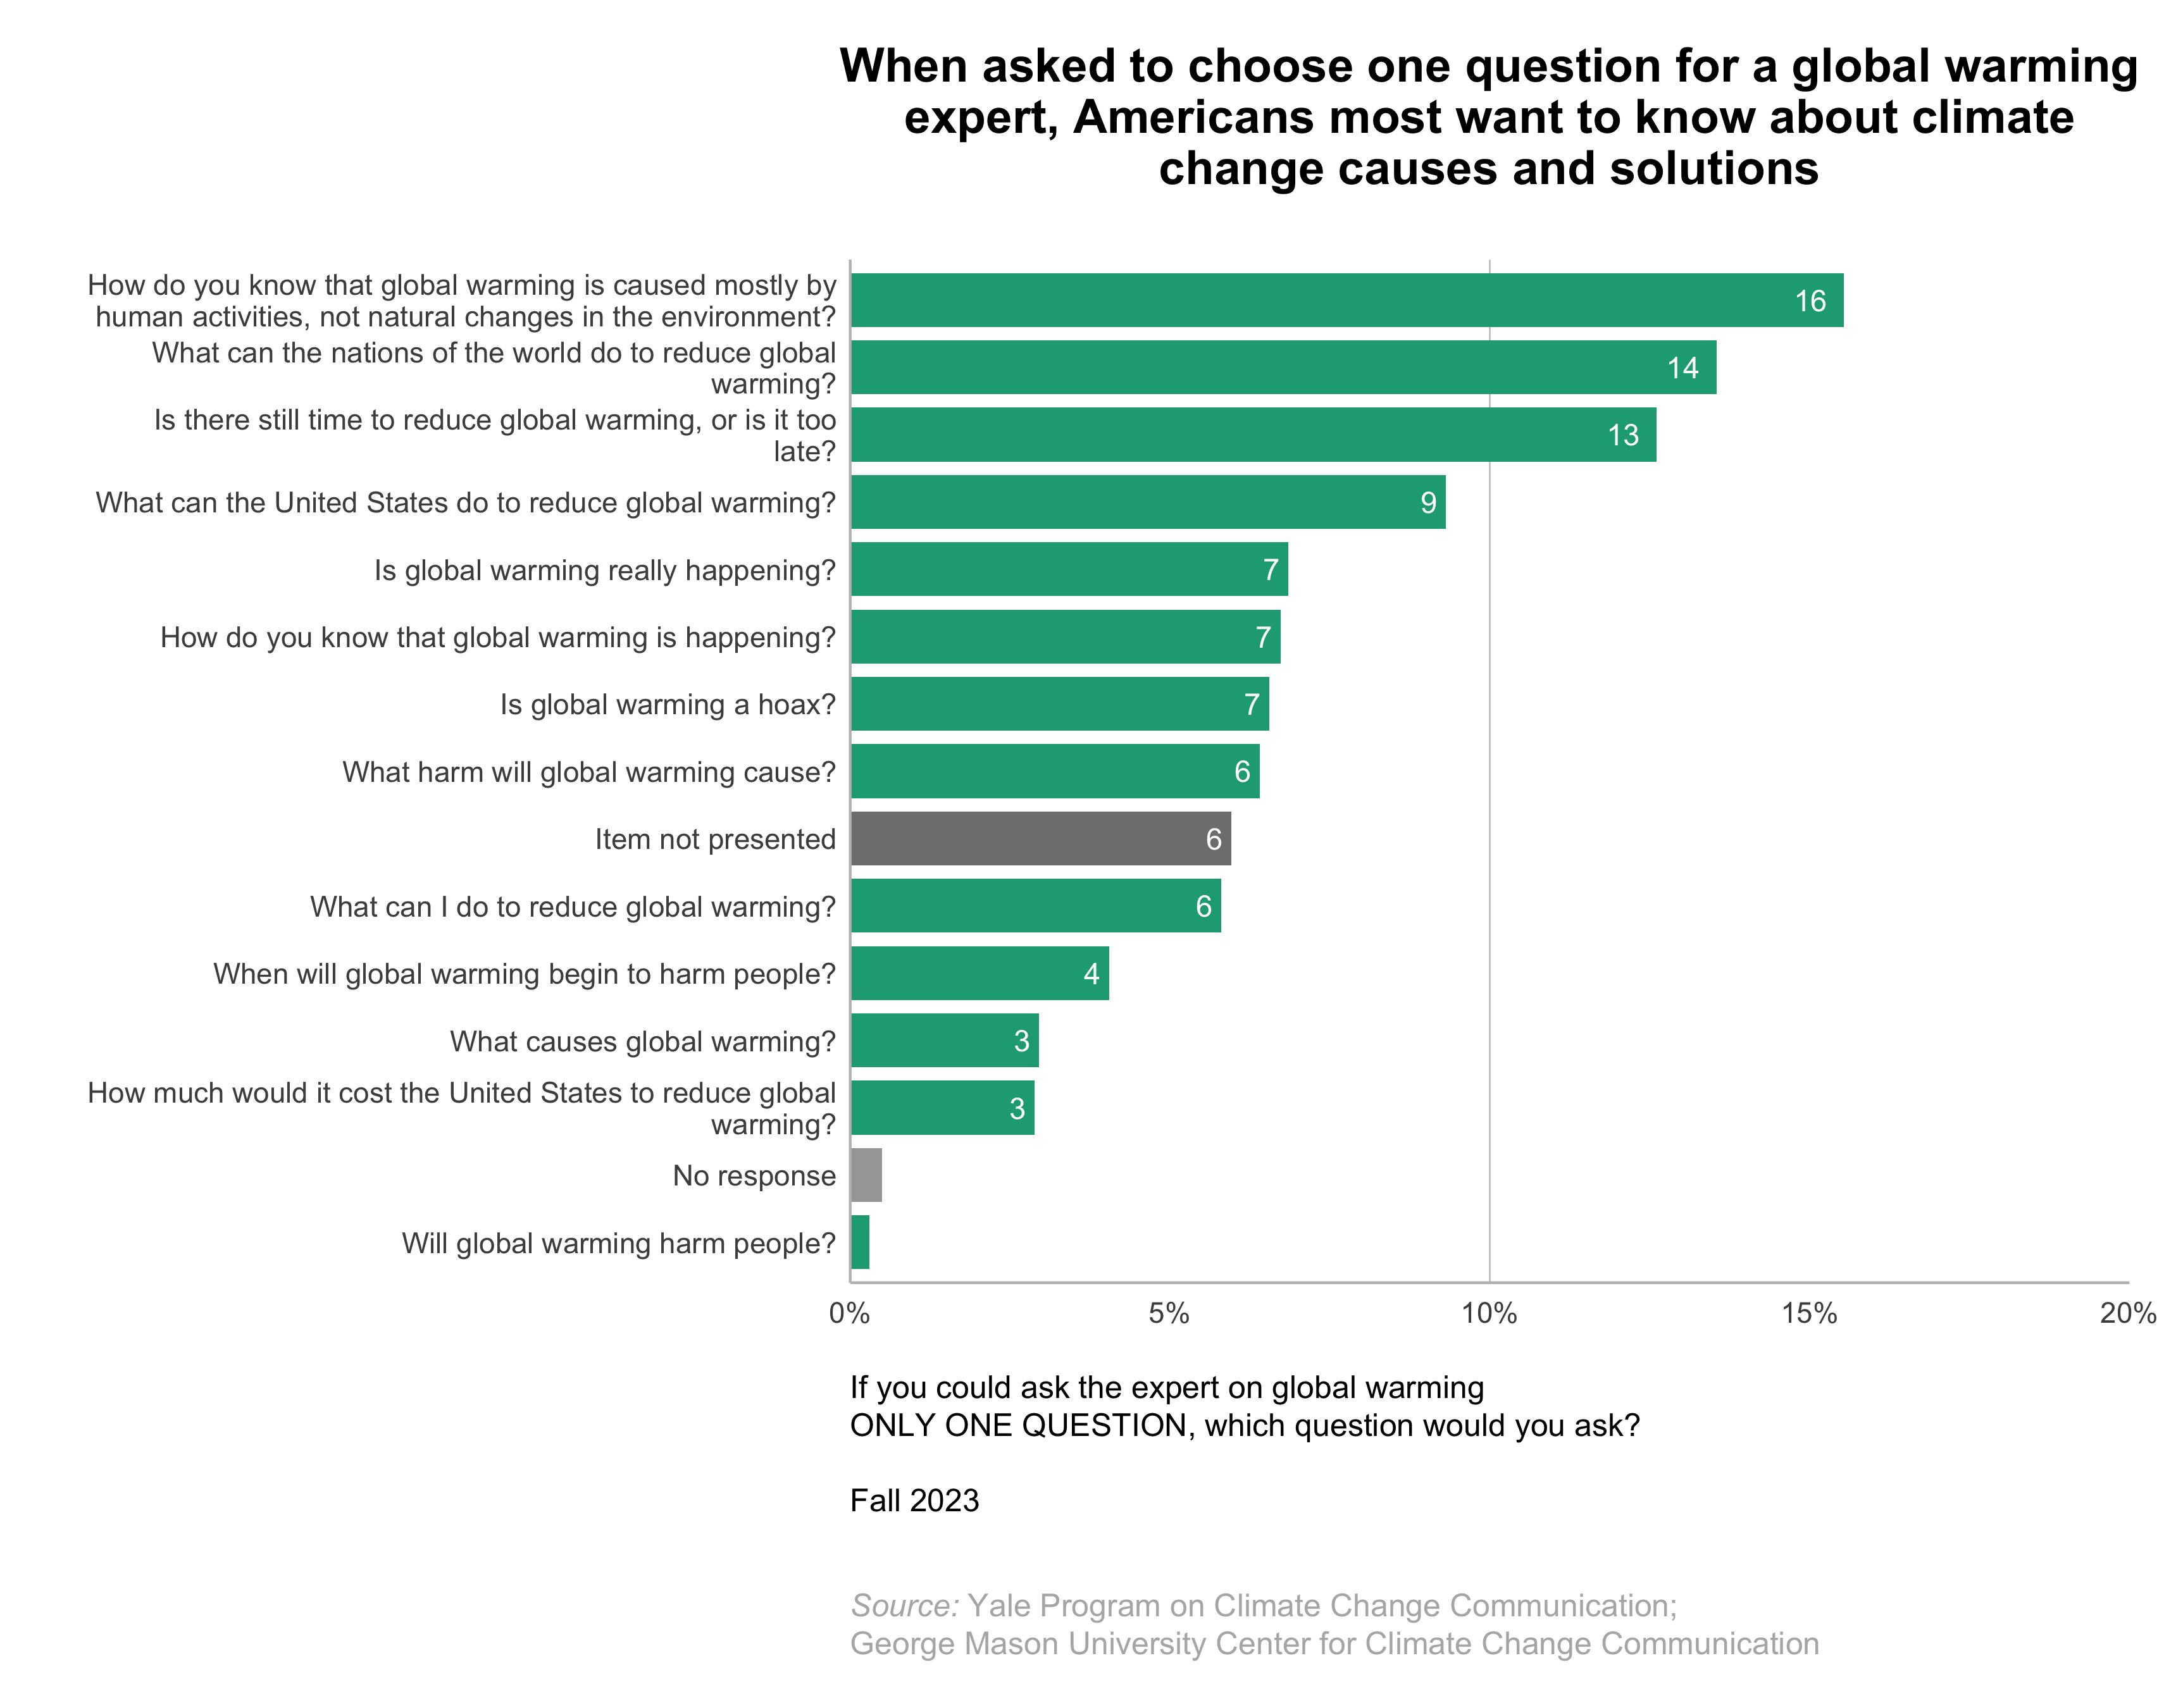 This bar chart shows the percentage of Americans who want to ask a global warming each specific question about climate change if they could only ask ONE question. Questions include "Is global warming really happening?", "How do you know that global warming is happening?", "What causes global warming?", "How do you know that global warming is caused mostly by human activities, not natural changes in the environment?", "What harm will global warming cause?", "Will global warming harm people?", "When will global warming begin to harm people?", "What can the United States do to reduce global warming?", "What can I do to reduce global warming?", "How much would it cost the United States to reduce global warming?", "What can the nations of the world do to reduce global warming?", "Is there still time to reduce global warming, or is it too late?", and "Is global warming a hoax?". When asked which one question they would ask a global warming expert, Americans most want to know about climate change causes and solutions. Data: Climate Change in the American Mind, Fall 2023. Refer to the data tables in Appendix 1 of the report for all percentages.